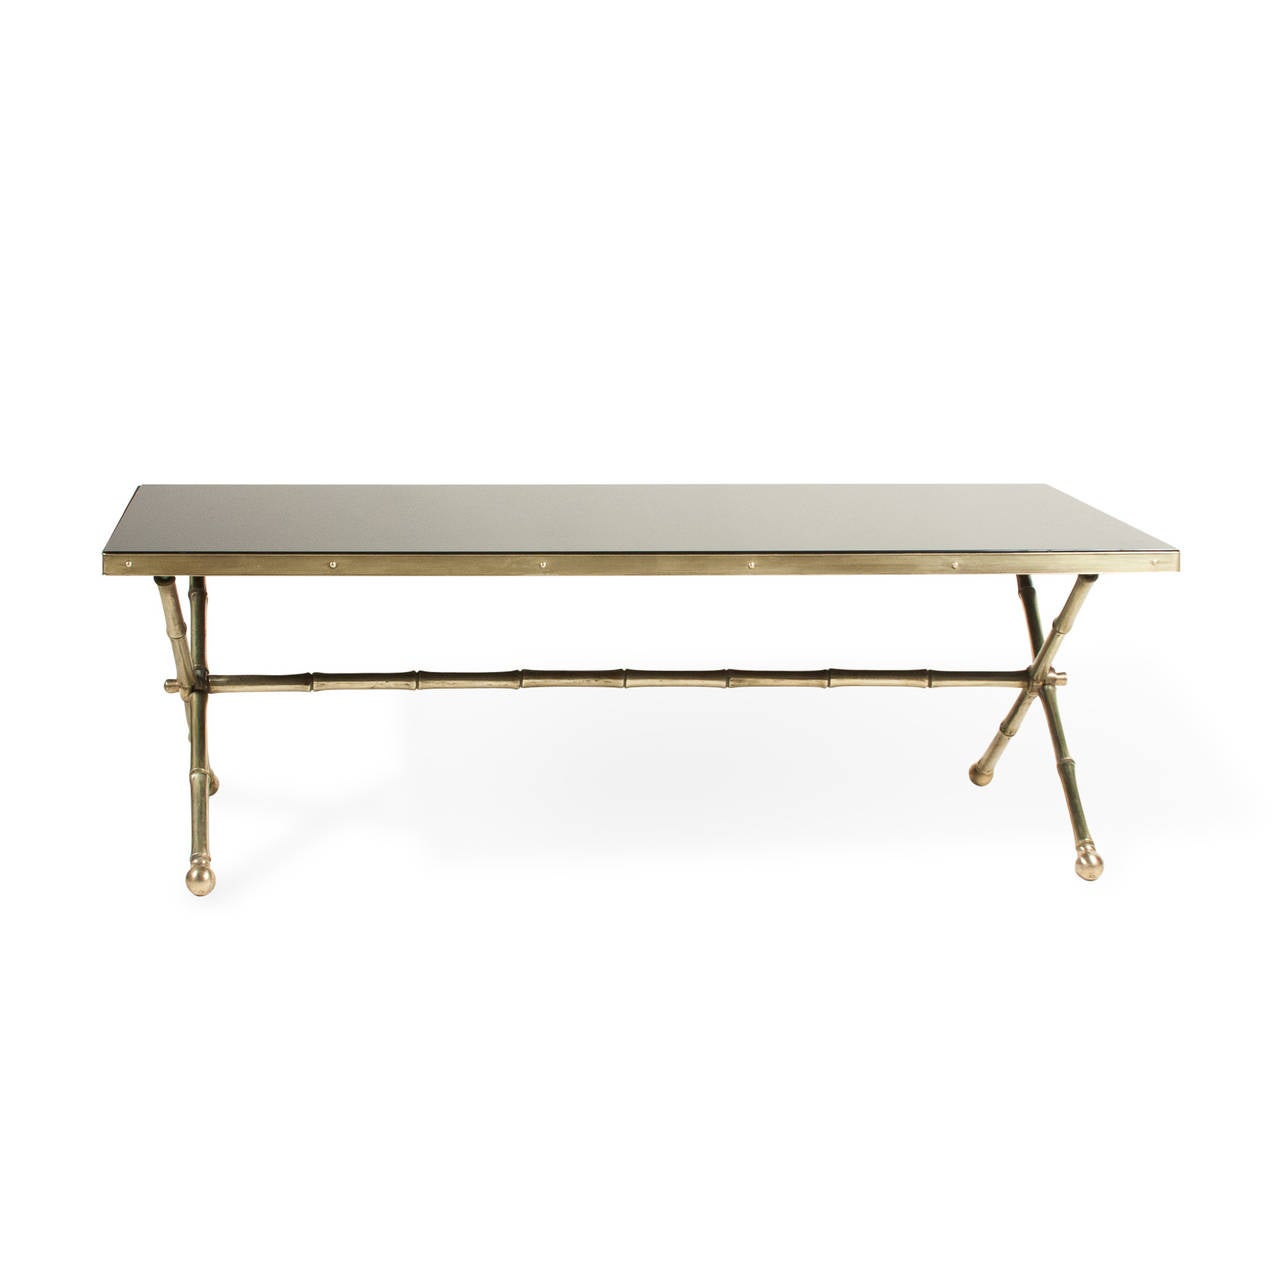 Rectangular black glass top coffee table, bronze faux bamboo frame, crossed legs at either end, with cross stretcher, French, 1960s. Length 40 in, width 19 1/2 in, height 13 in.